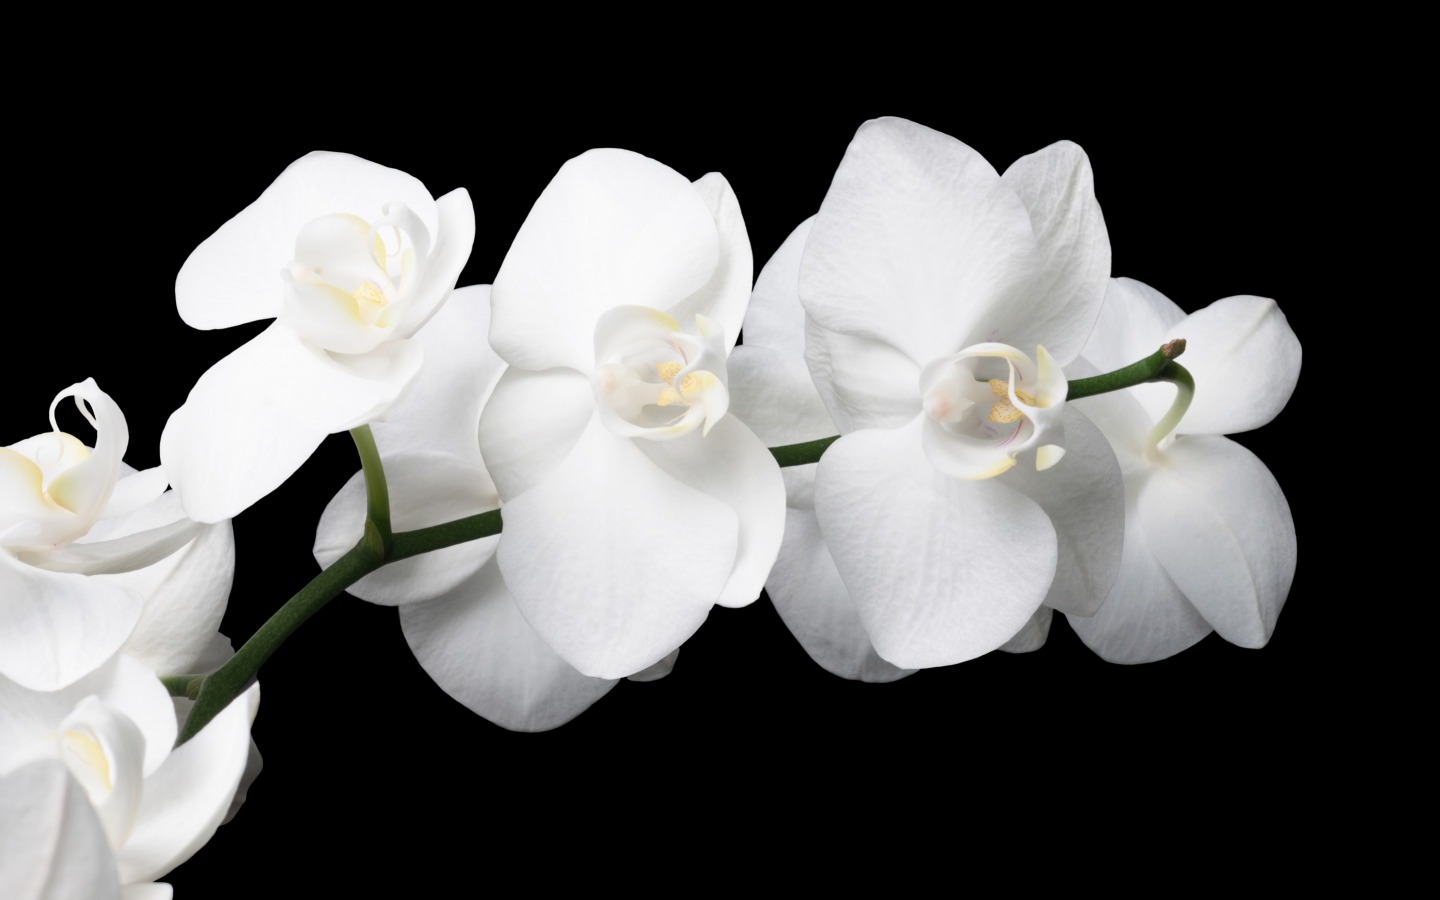 Flowers Image Orchid HD Wallpaper And Background Photos